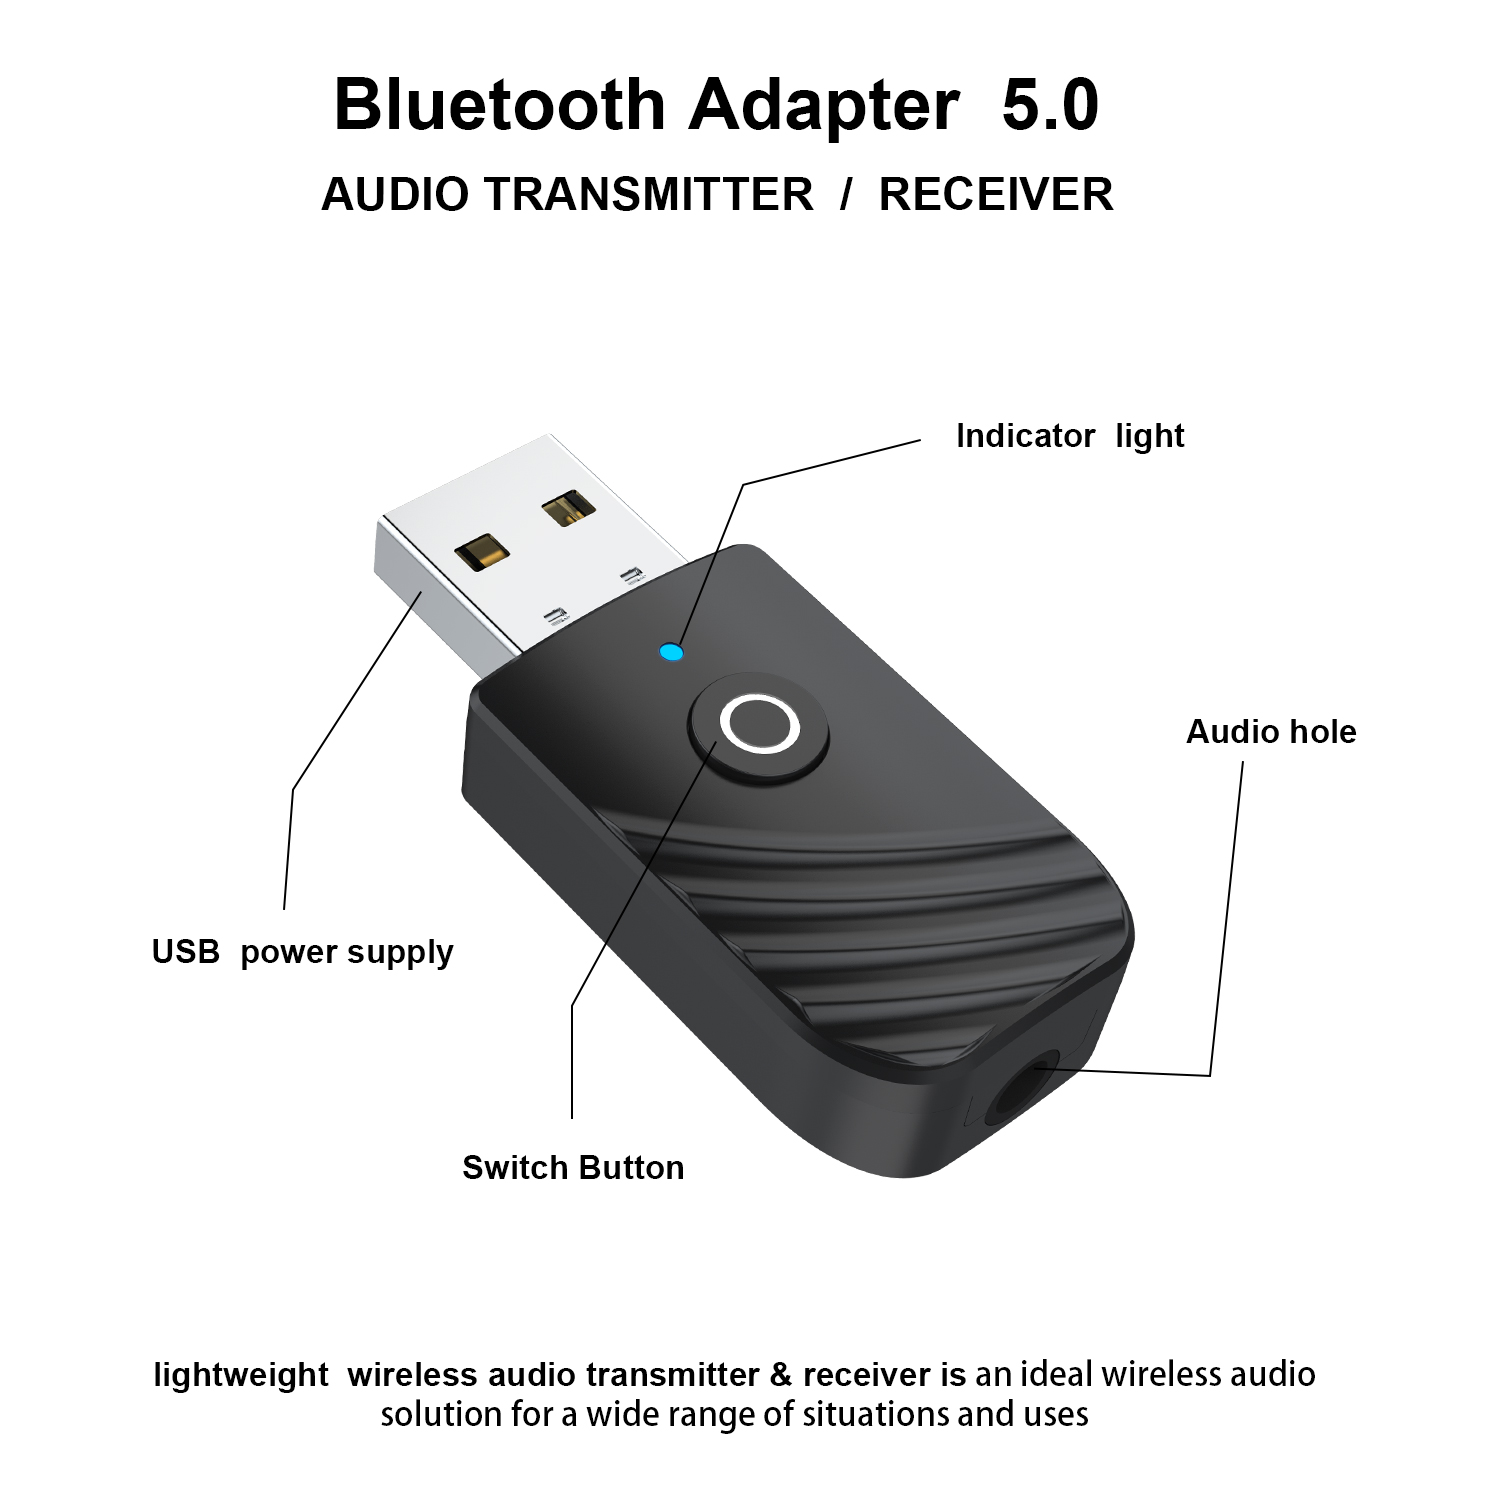 SY319-Wireless-USB-Bluetooth-50-Audio-Transmitter-Receiver-3-In-1-Adapter-For-TV-PC-Car-1850380-7